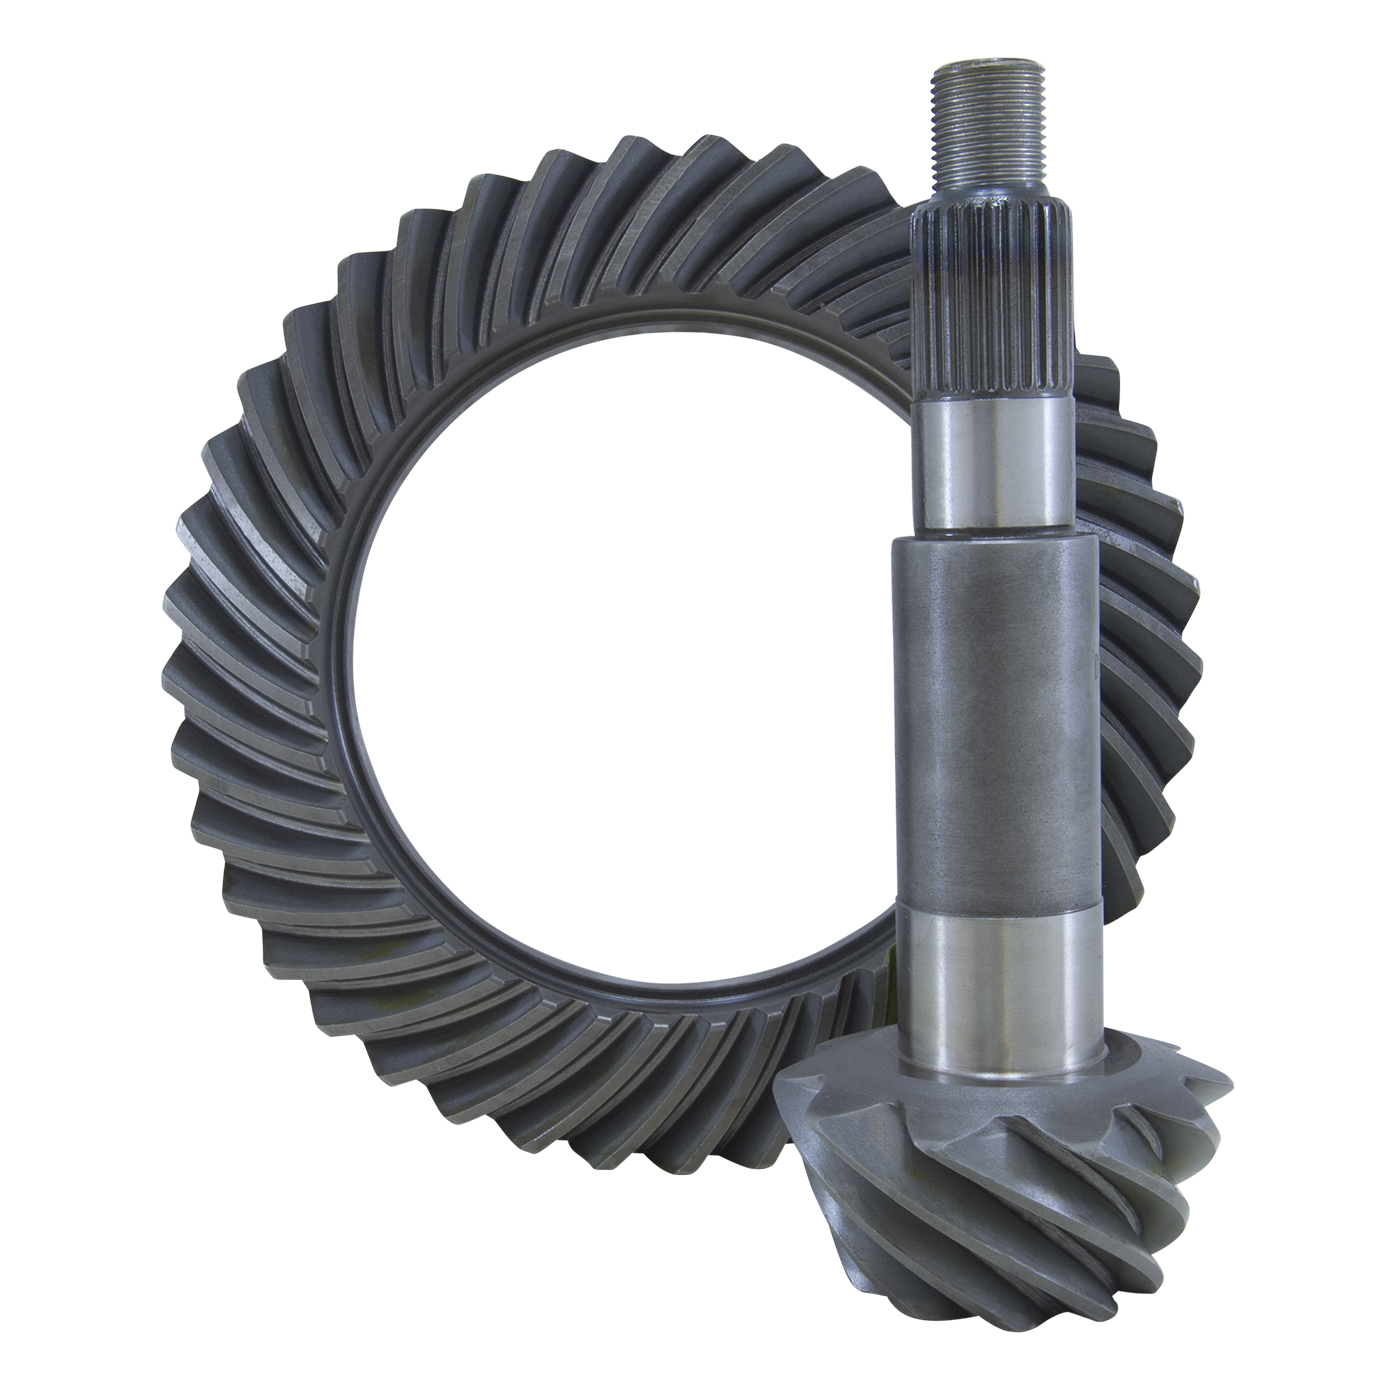 USA Standard replacement Ring & Pinion gear set for Dana 60 in a 6.17 ratio